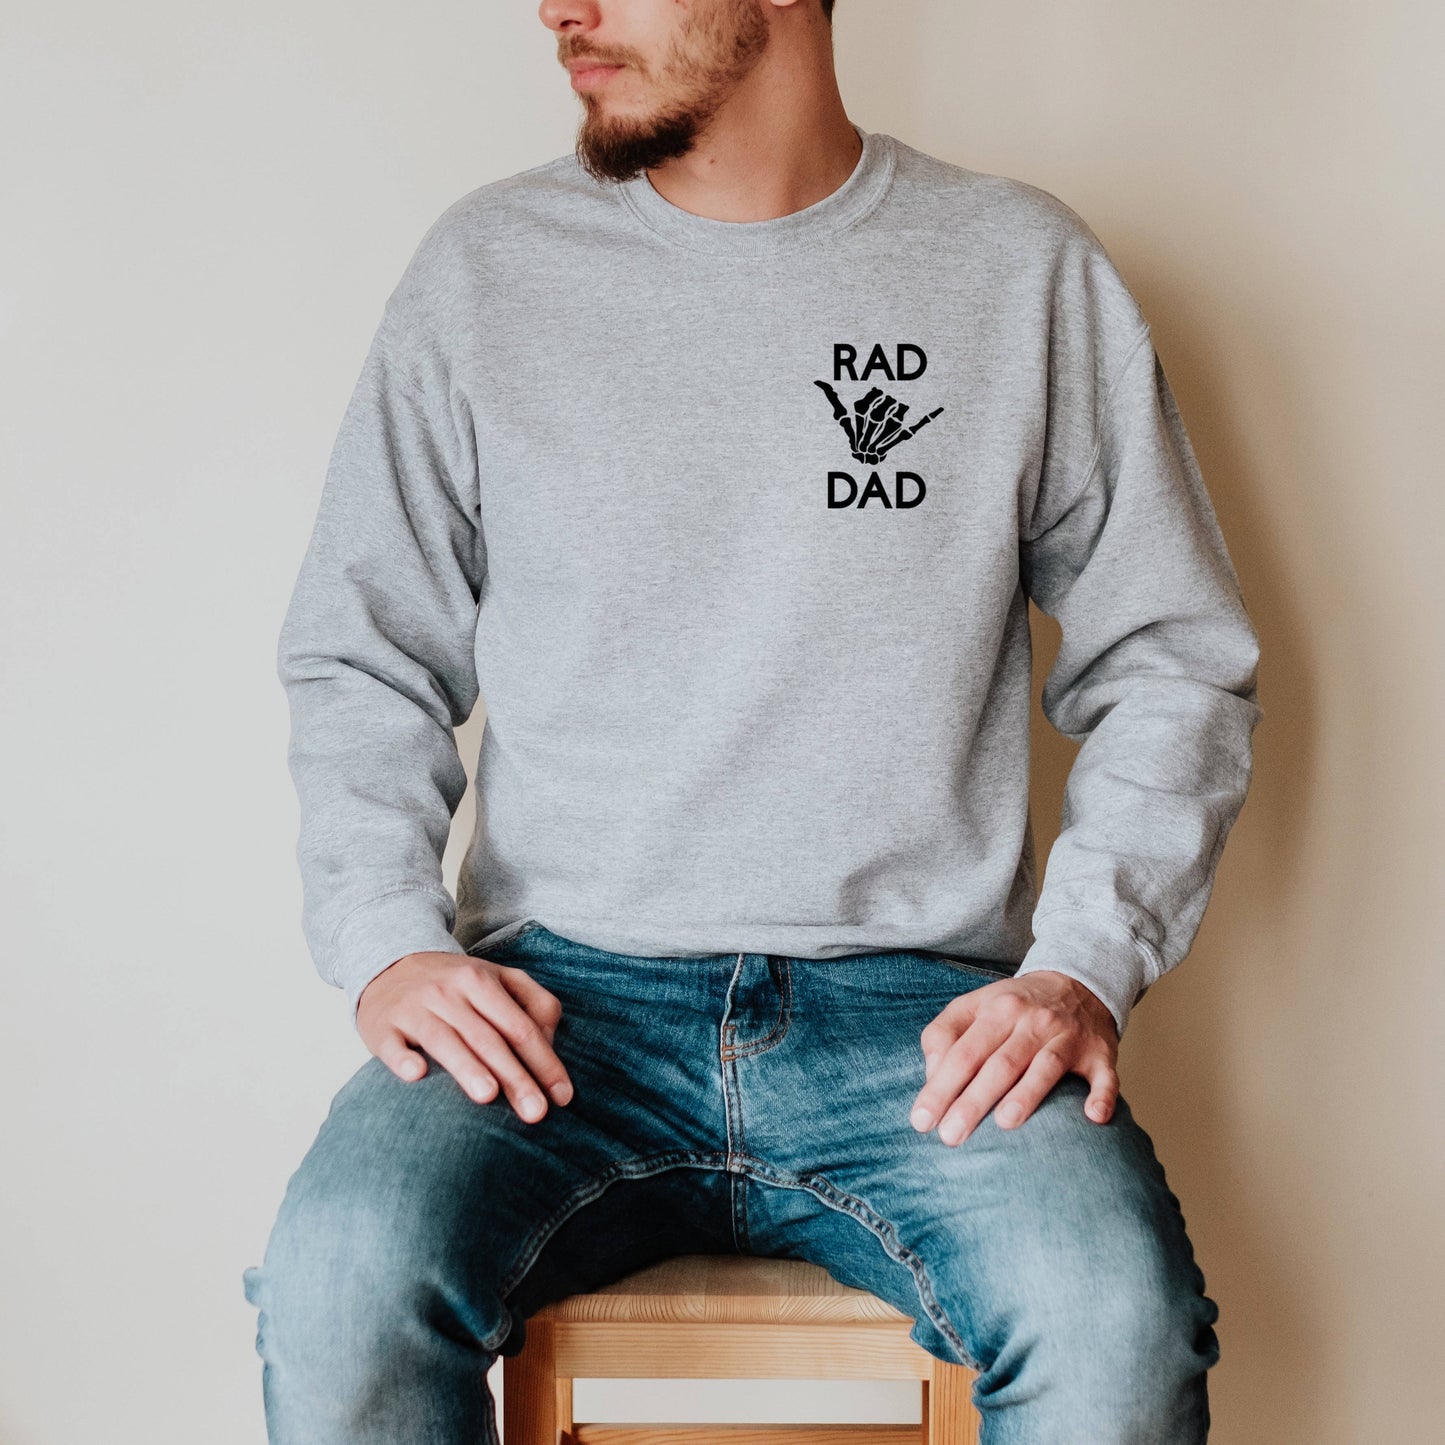 Rad Dad Crewneck Sweatshirt, Father's Day Gift for Dad, Fathers Day, Cool Dad, New Dad Gift from Wife, from Daughter